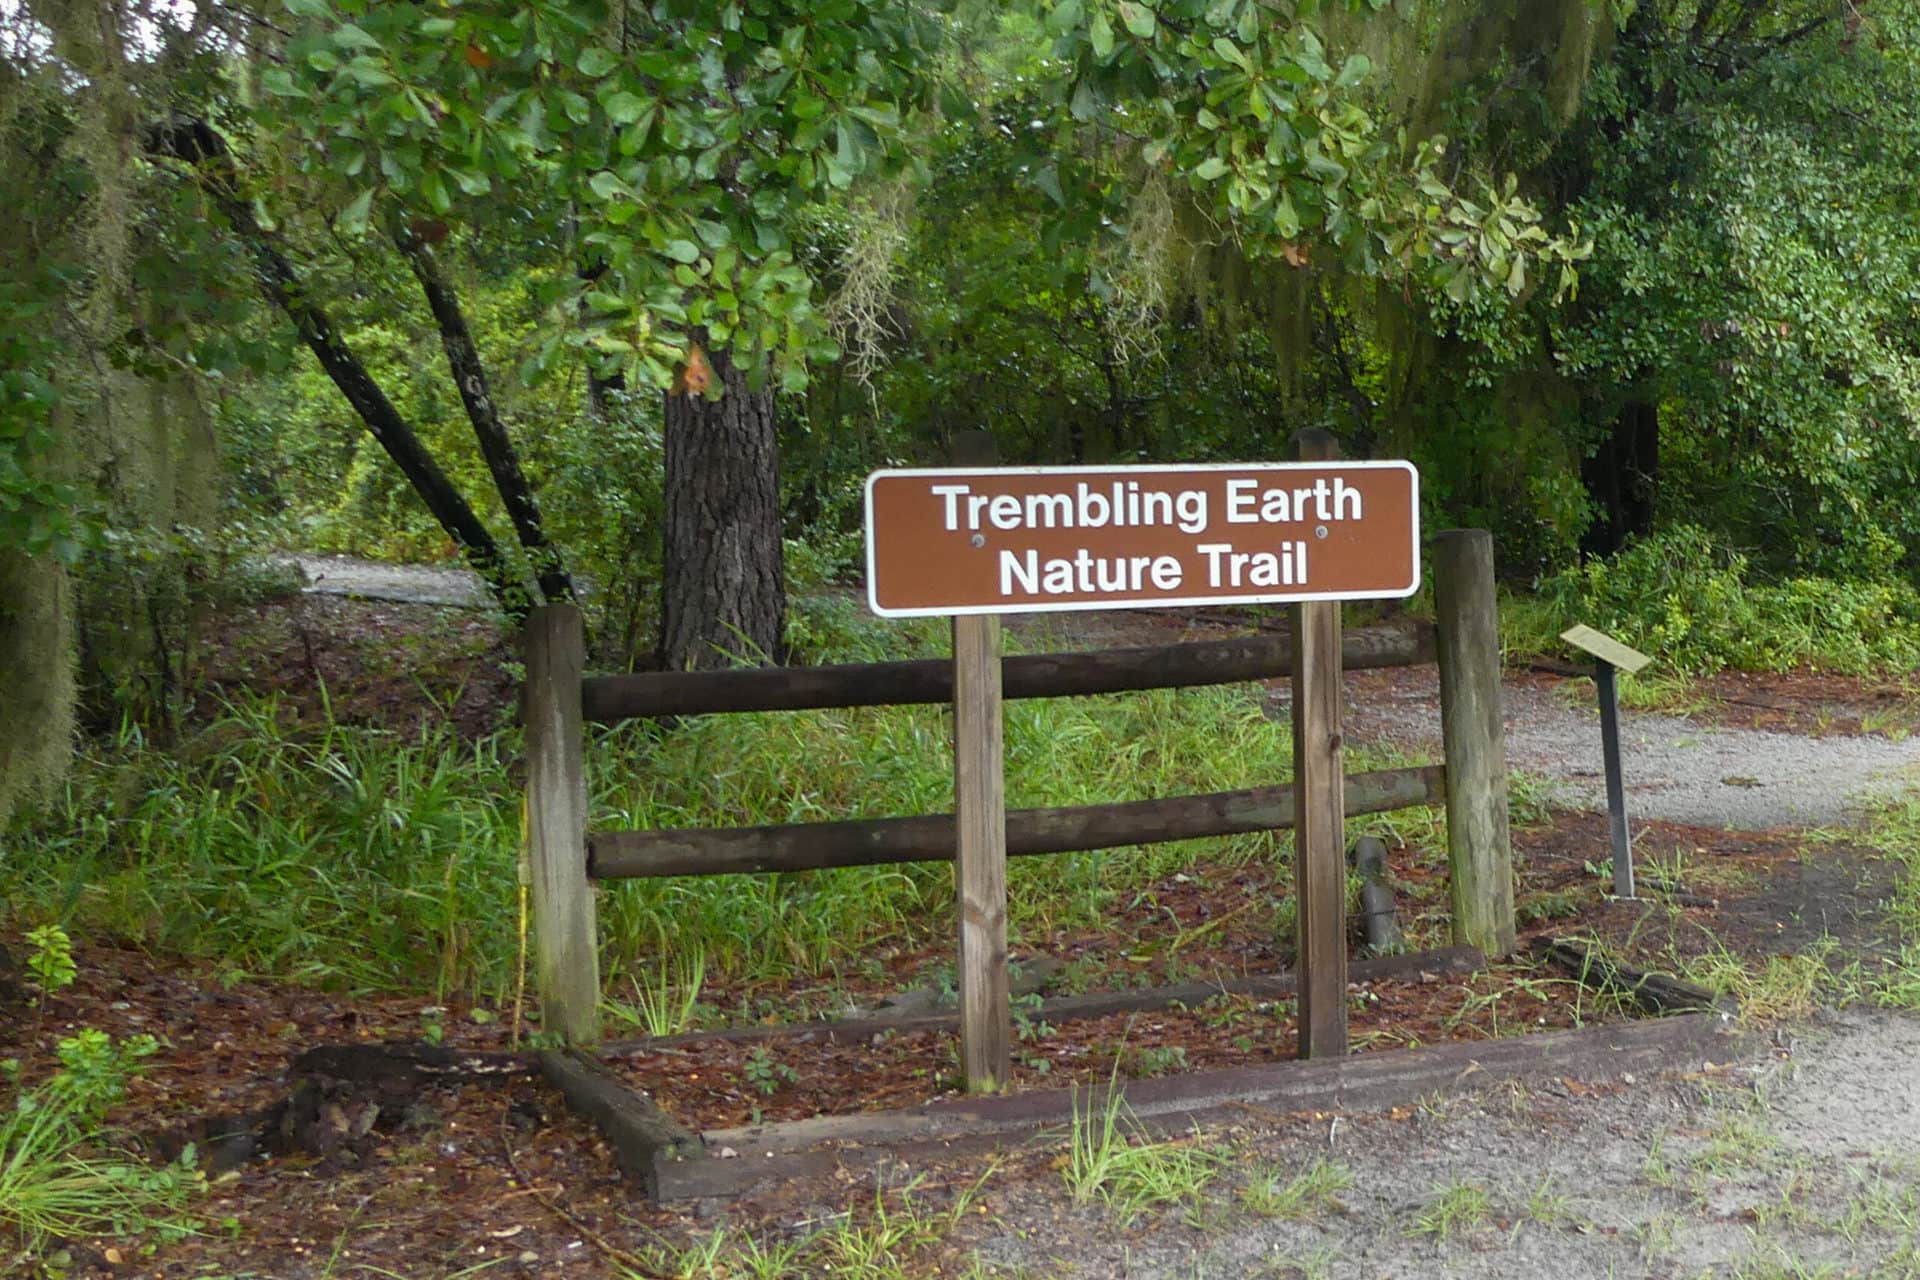 a brown and white sign says "trembling earth nature trail" surrounded by greenery